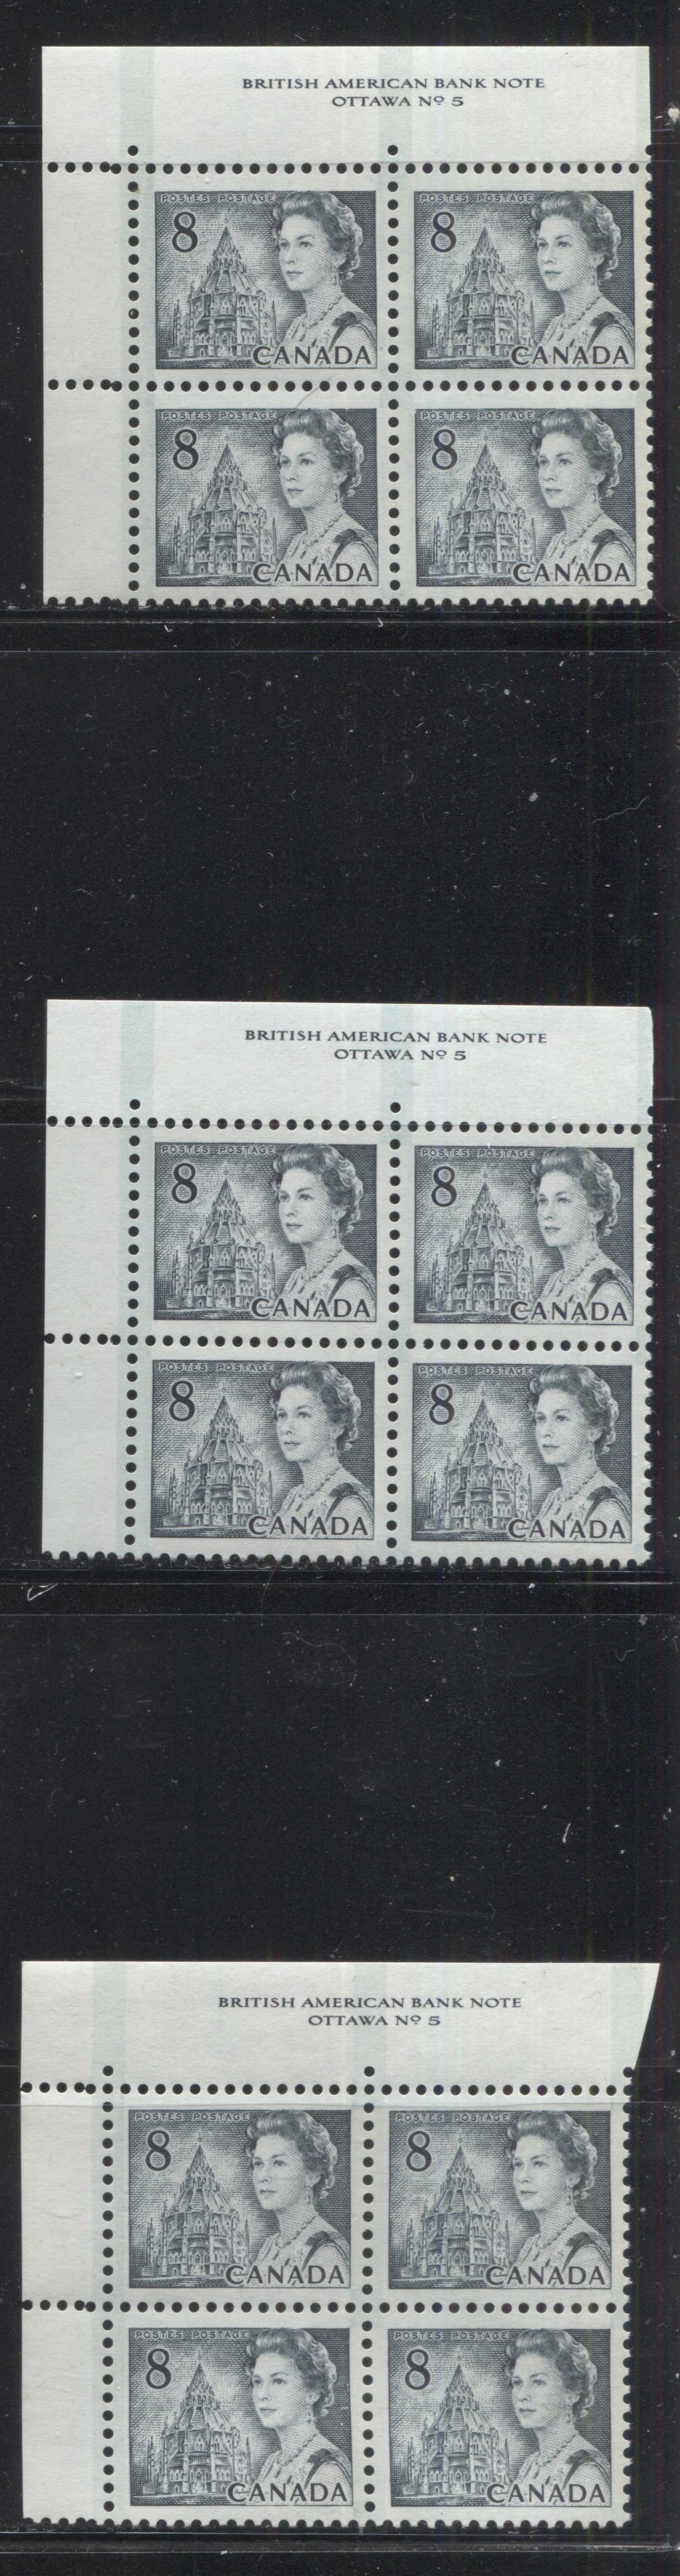 Lot 141 Canada #544pv 8c Slate Queen Elizabeth II, 1967-1973 Centennial Issue, Three VFNH UL GT2 Tagged Plate 5 Blocks Of 4 On LF-fl Smooth Papers With PVA Gums